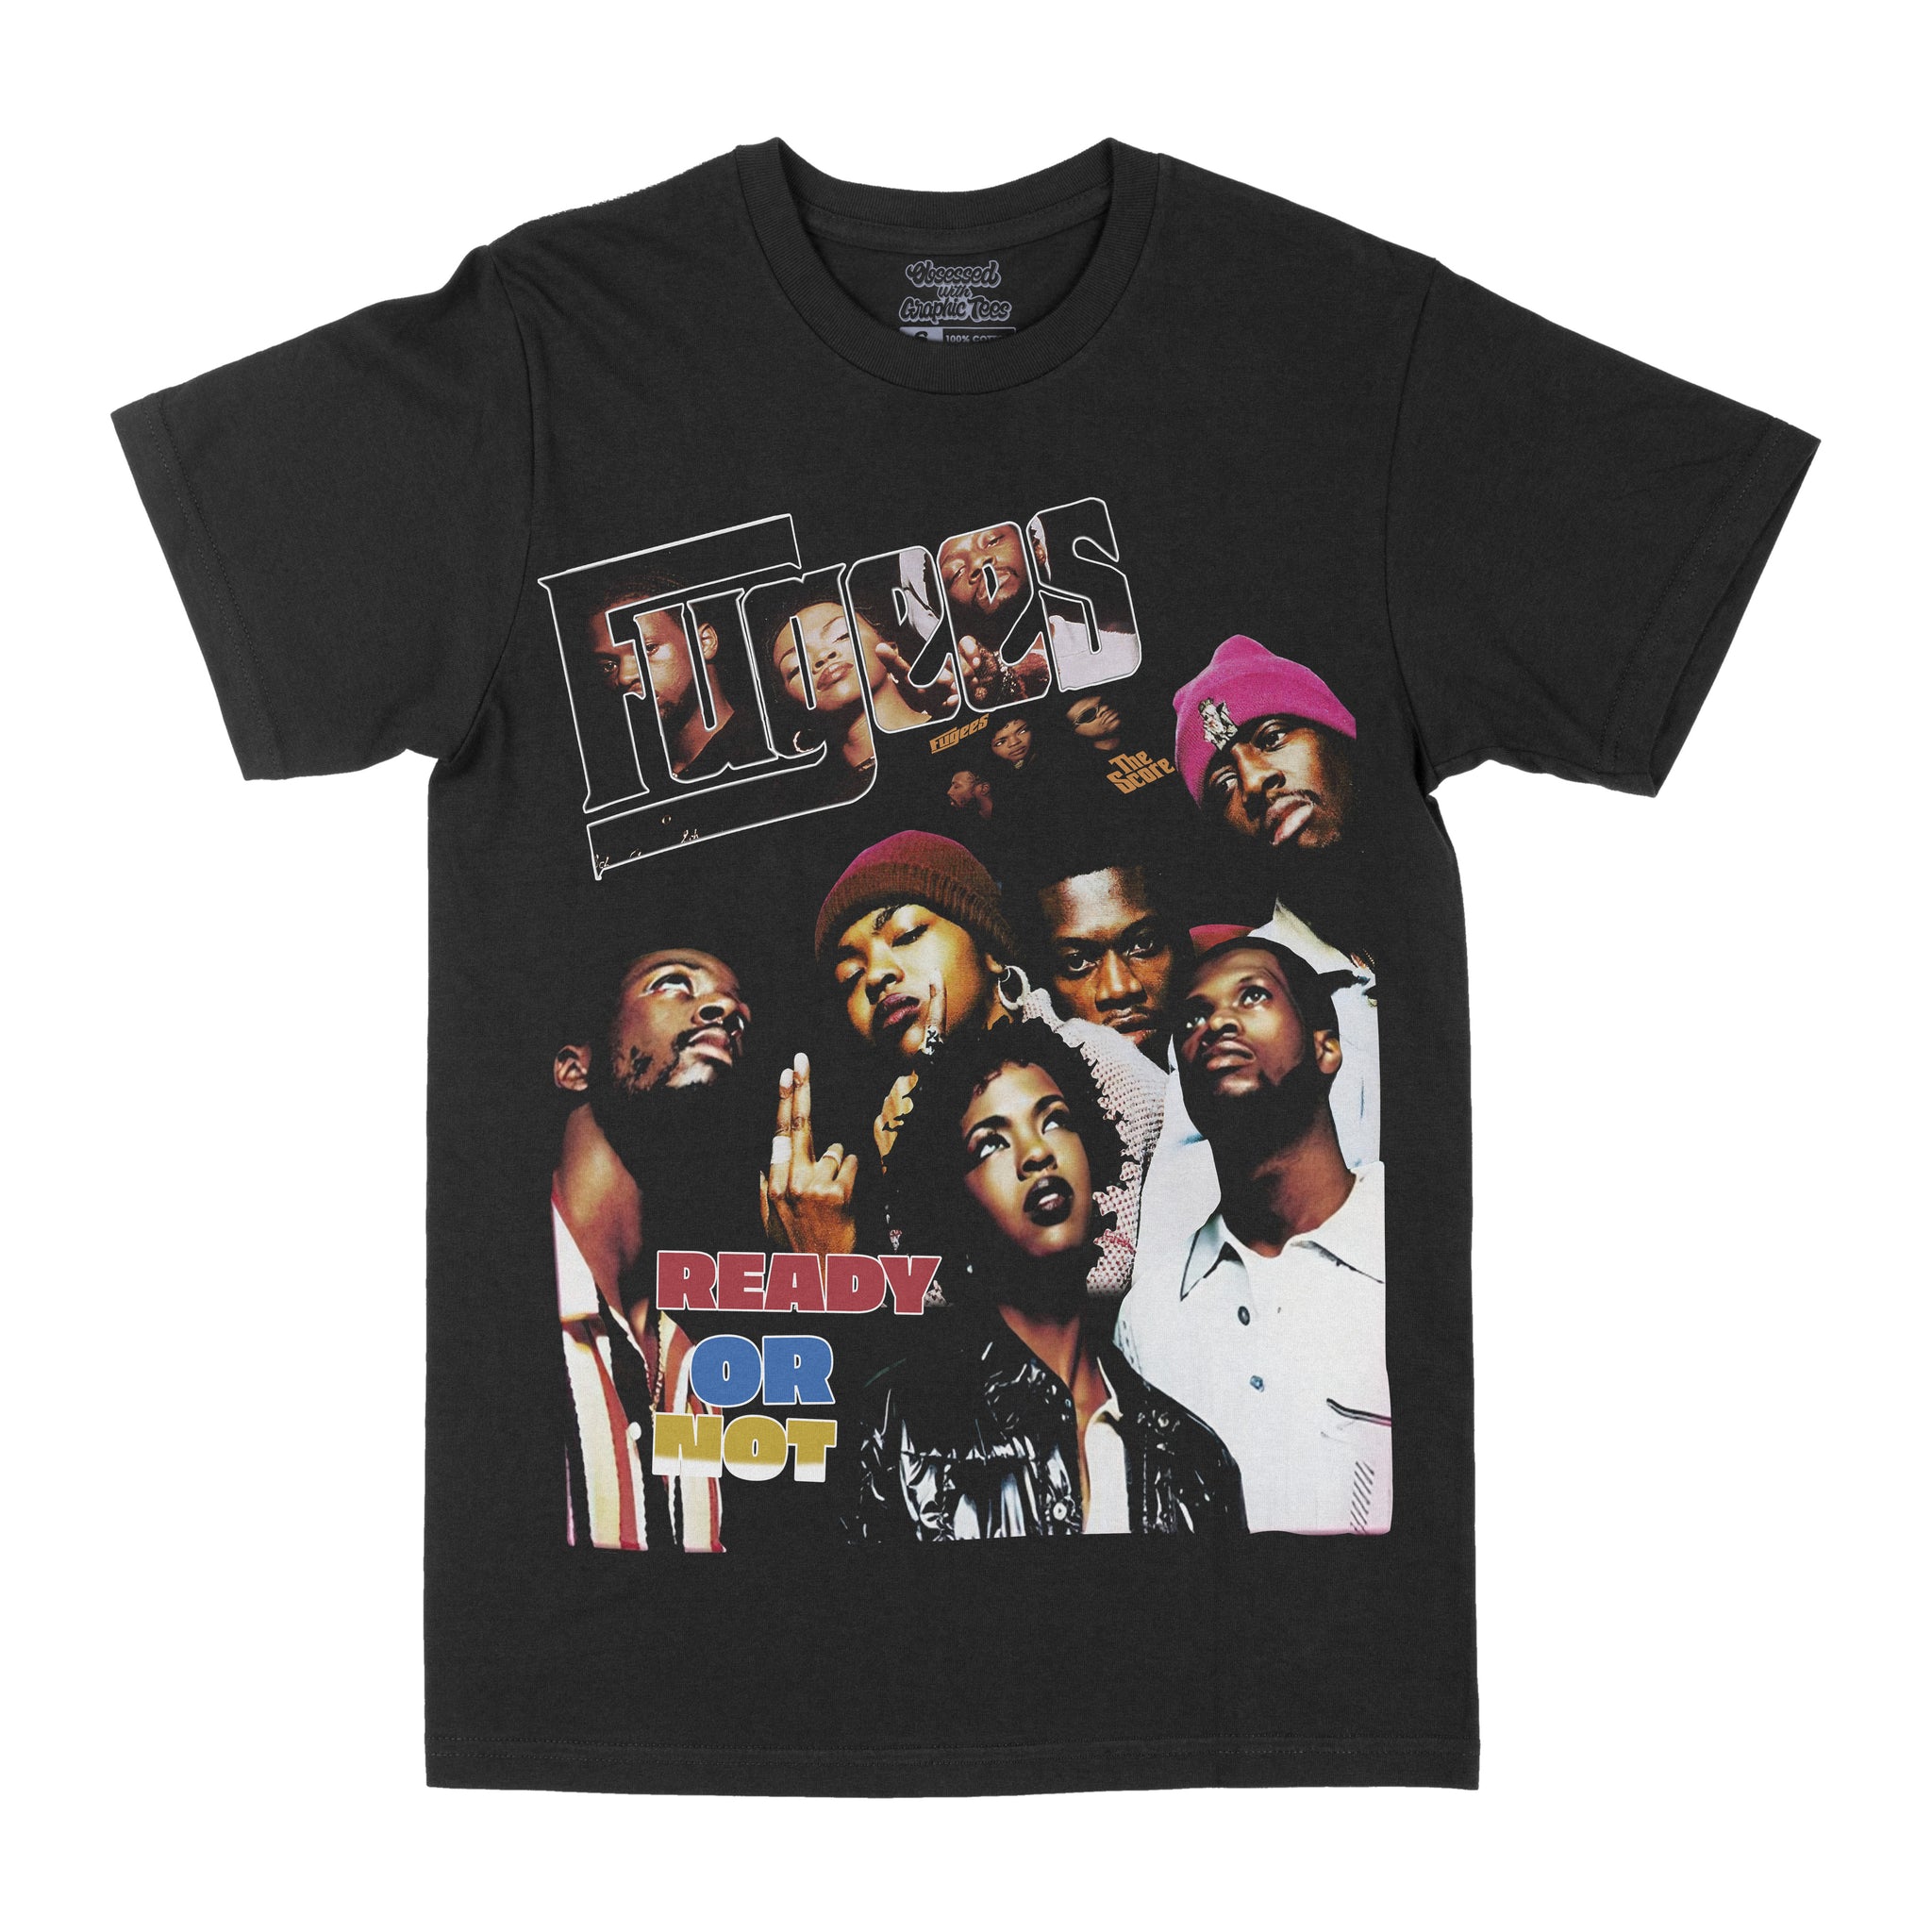 Fugees "Ready or Not" Graphic Tee